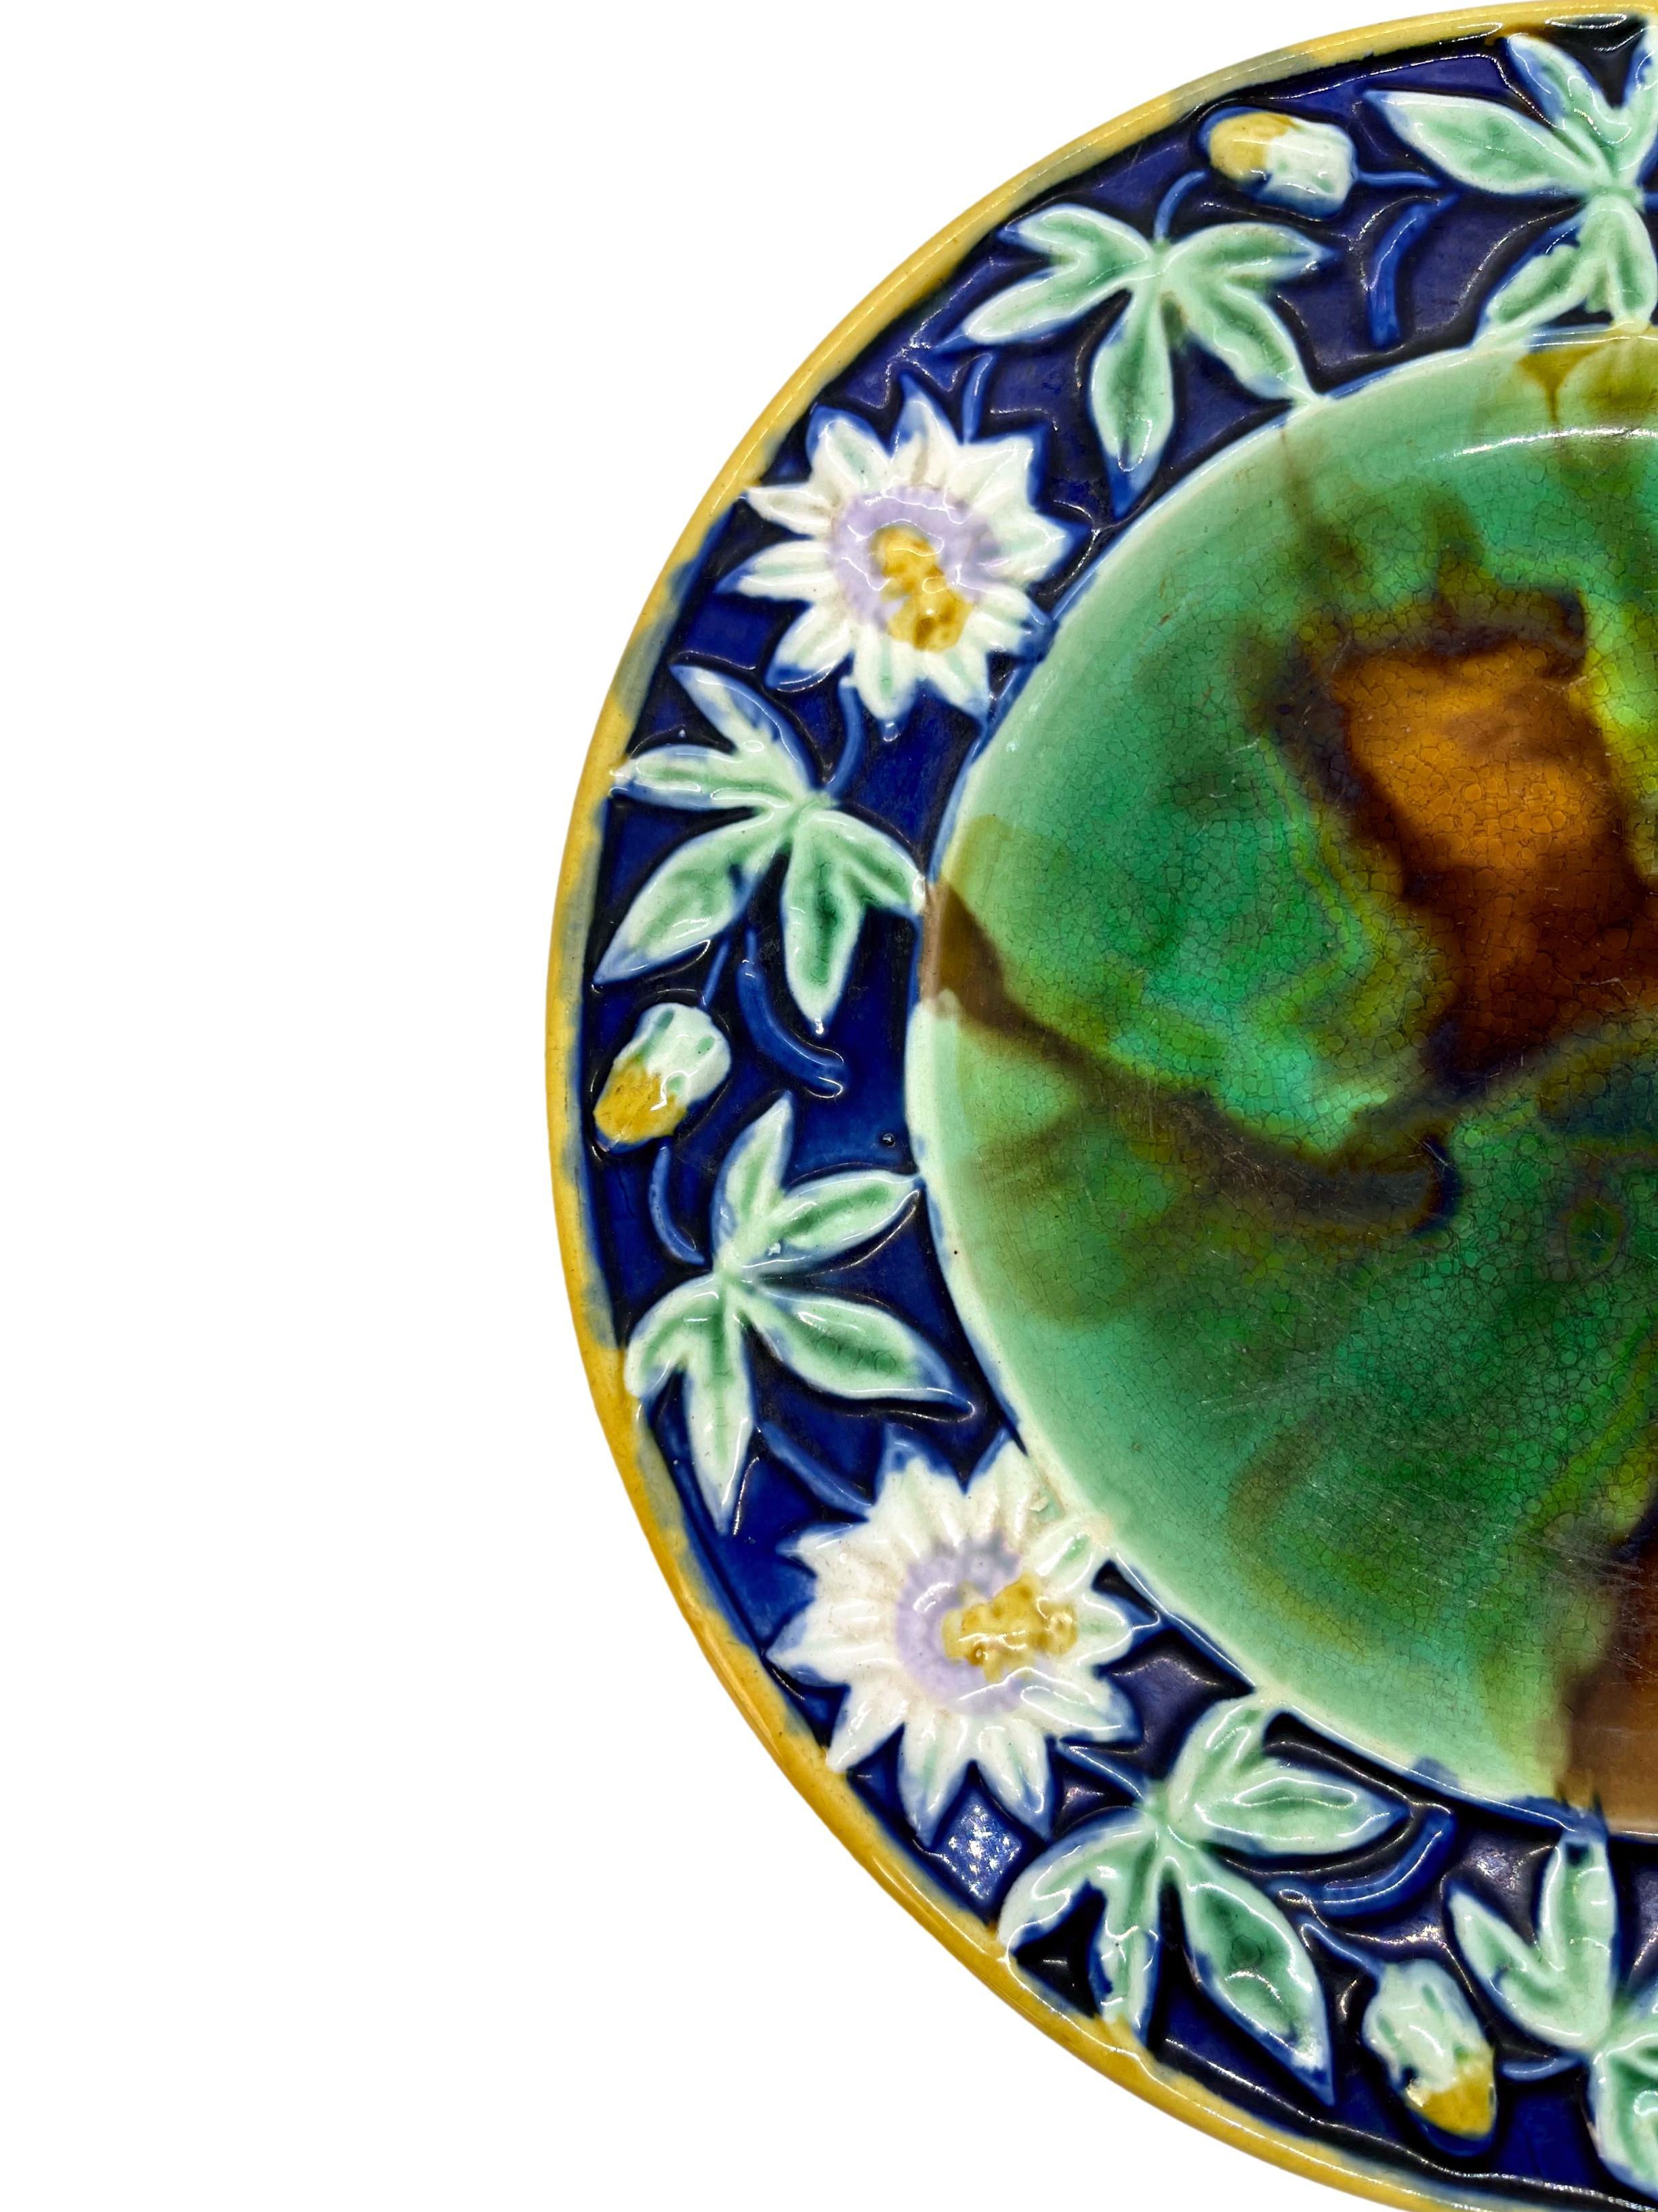 English majolica plate with relief-molded passion flowers and cobalt blue border, ca. 1880.
For thirty years, we have been among the world's preeminent specialists in fine antique majolica.